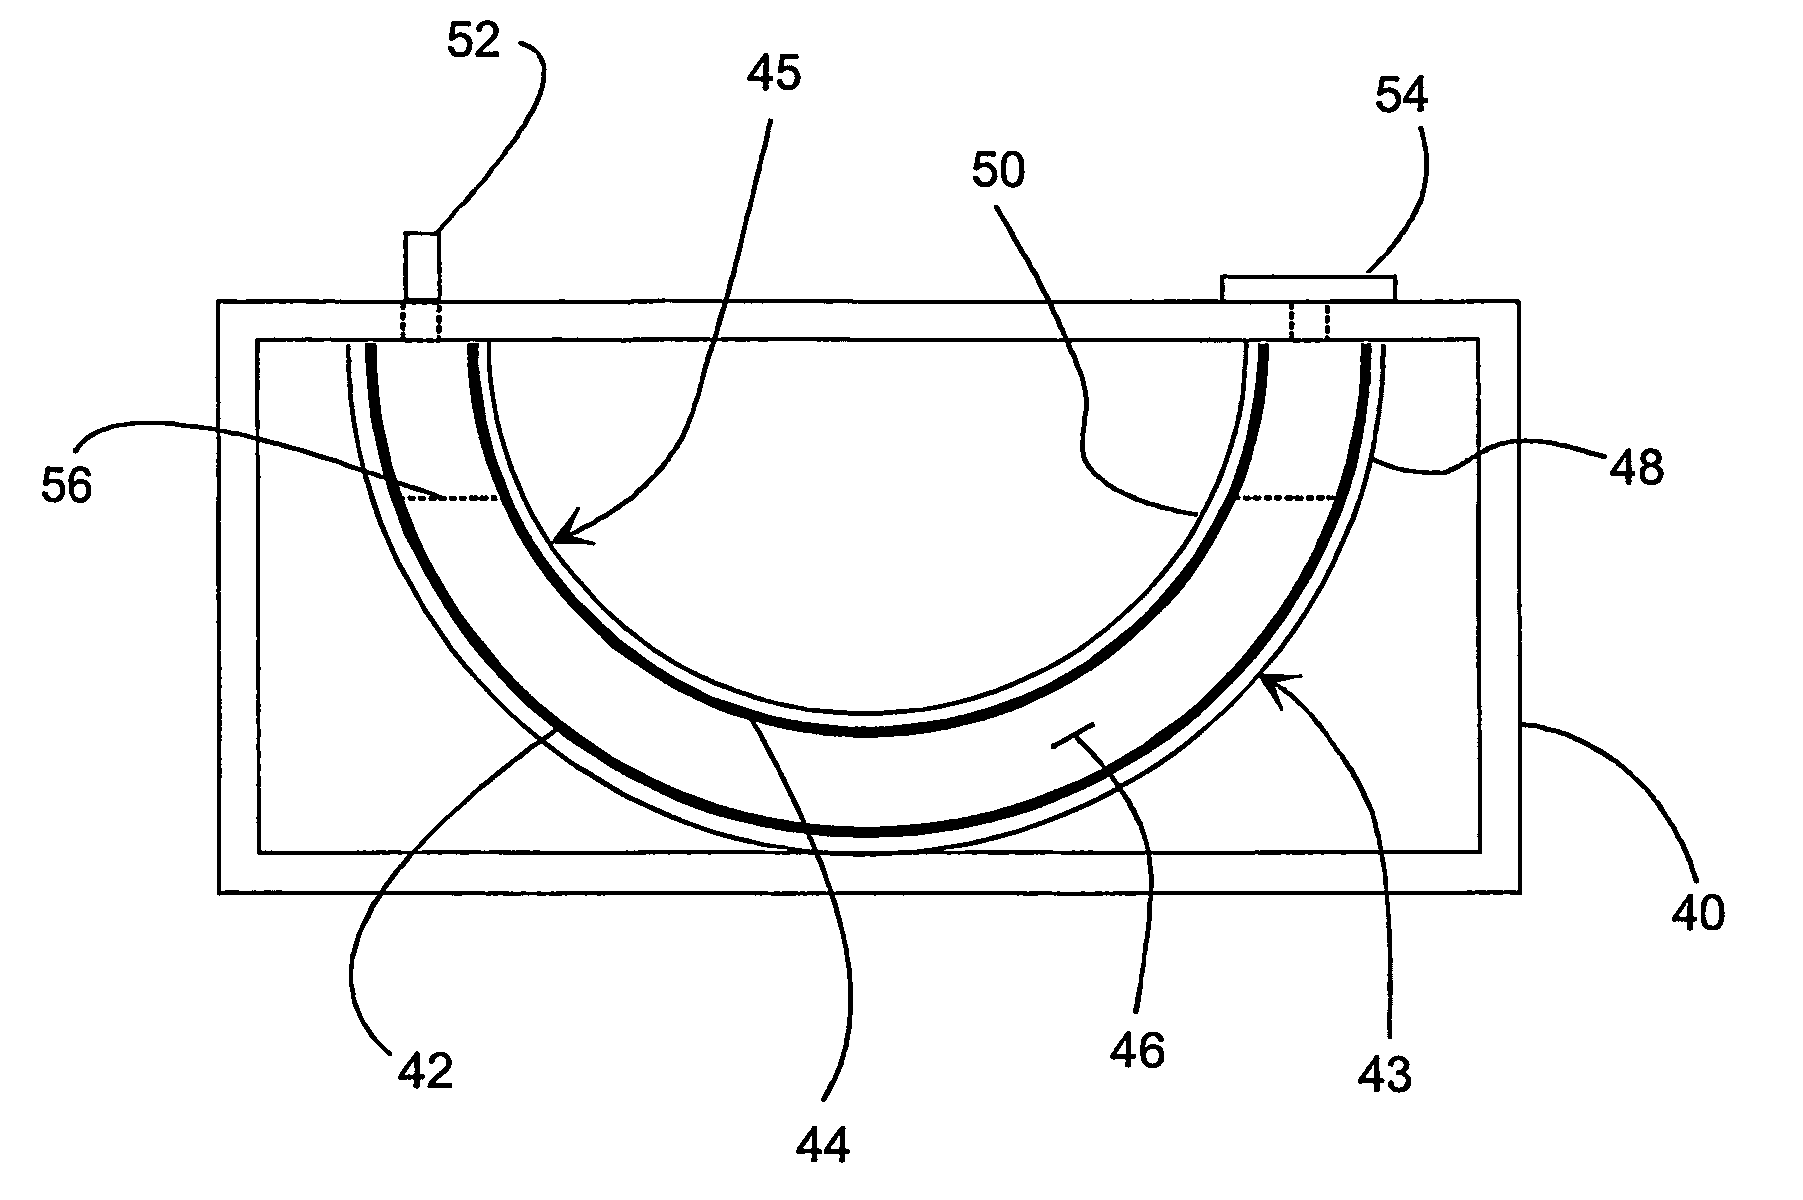 Non-uniform electric field chamber for cell fusion